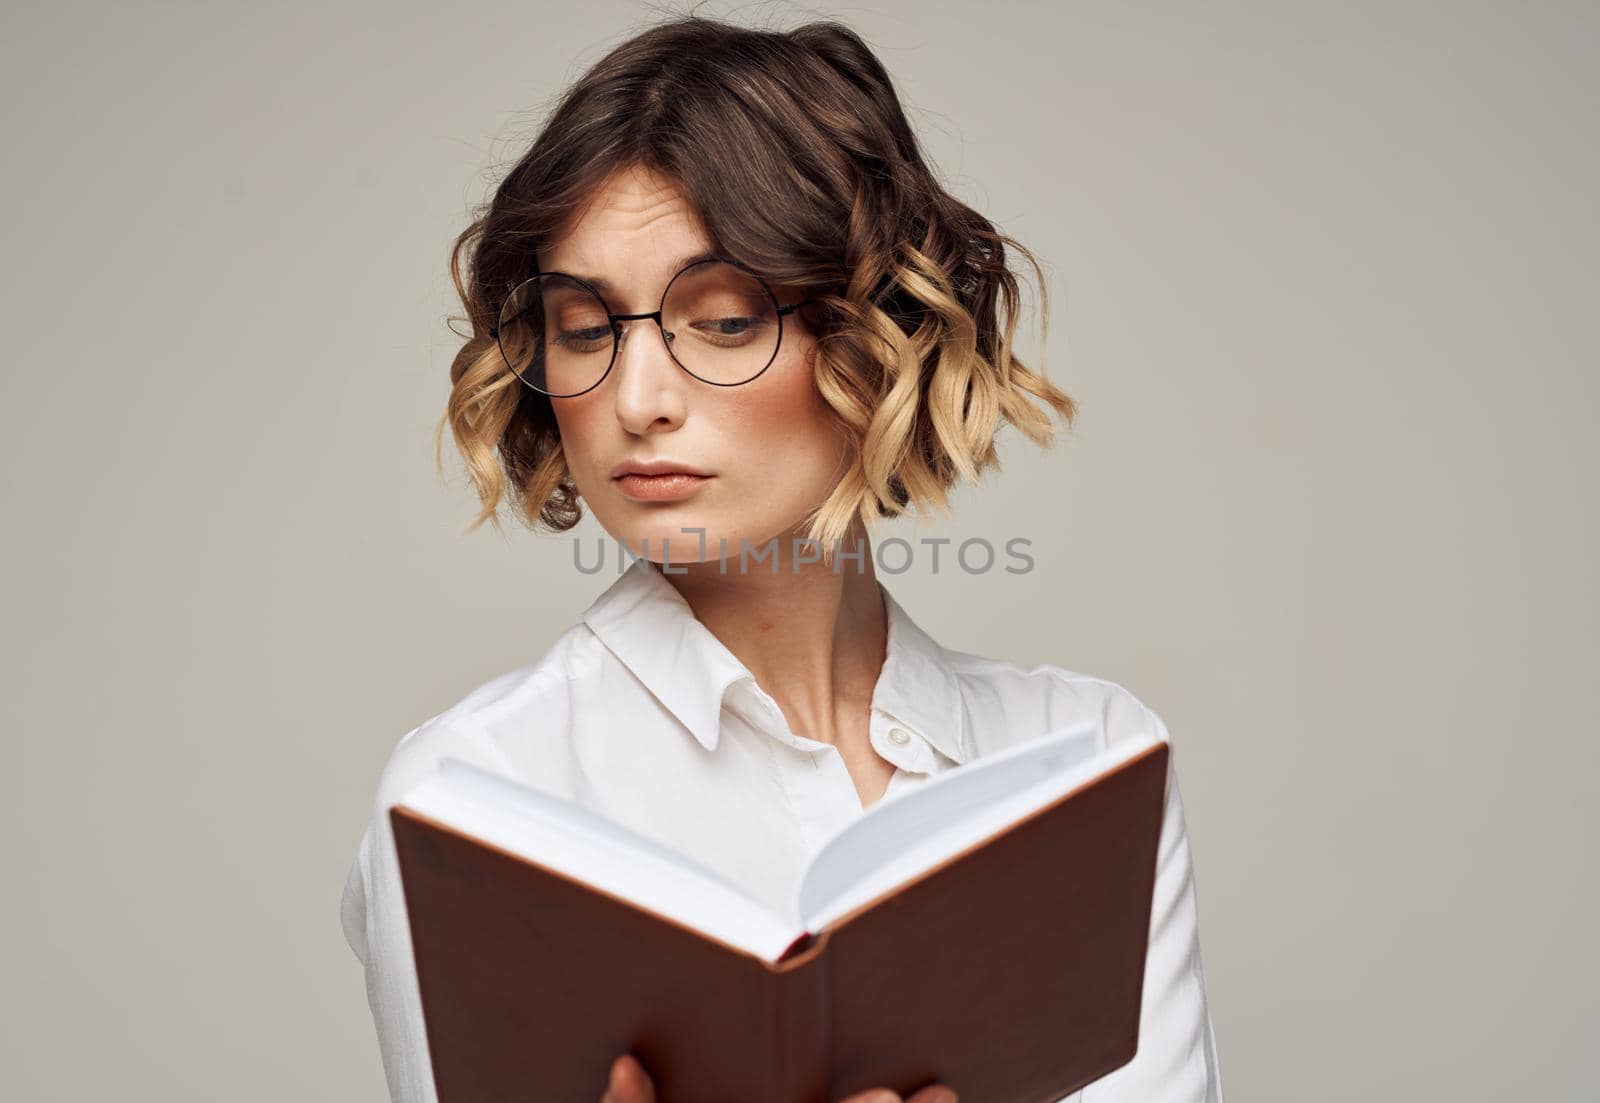 Literate woman with book in hands and in glasses white shirt education model by SHOTPRIME